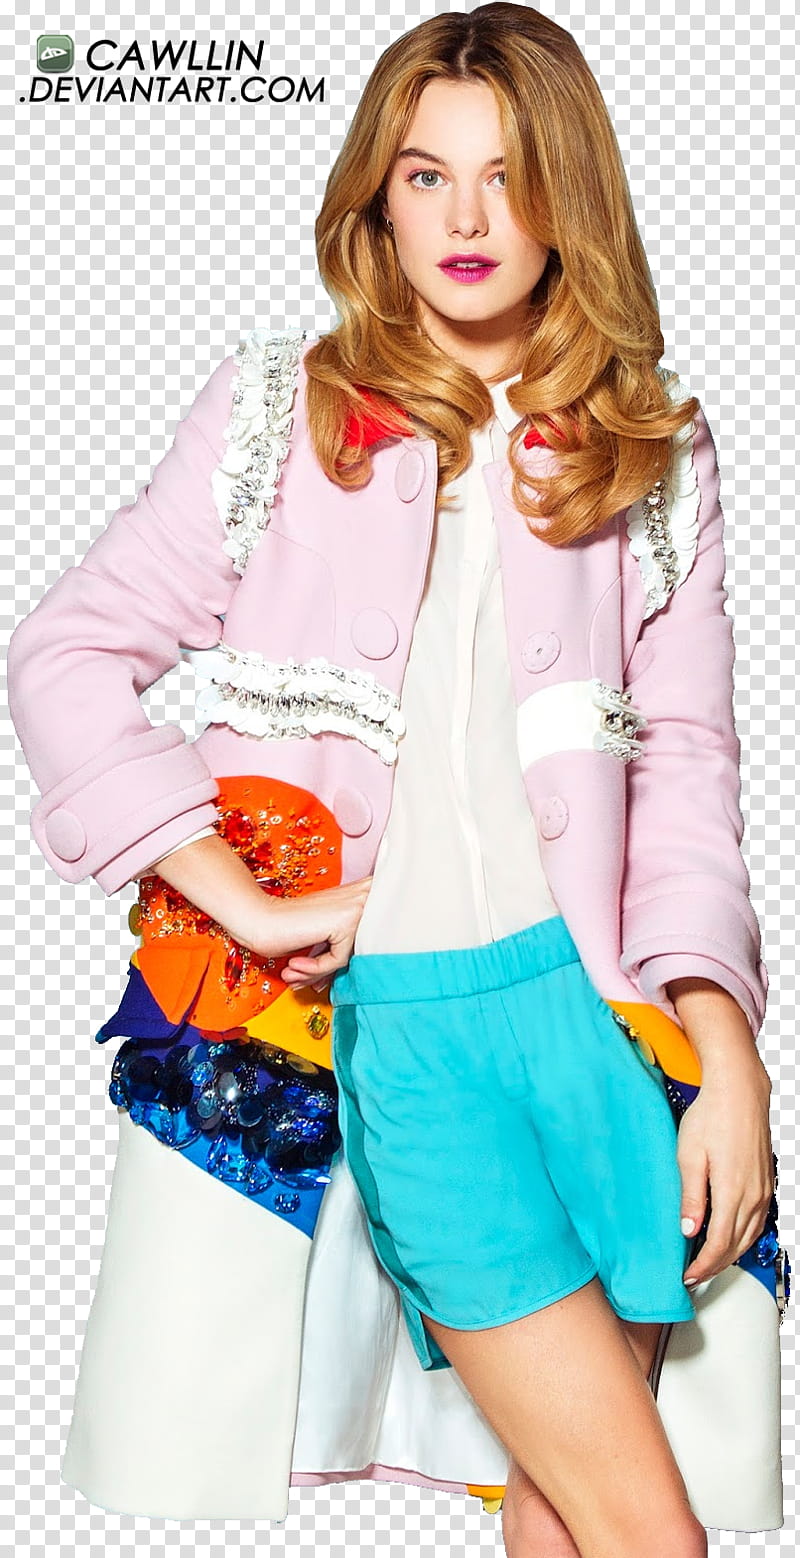 Camille Rowe model, standing woman wearing pink jacket transparent background PNG clipart